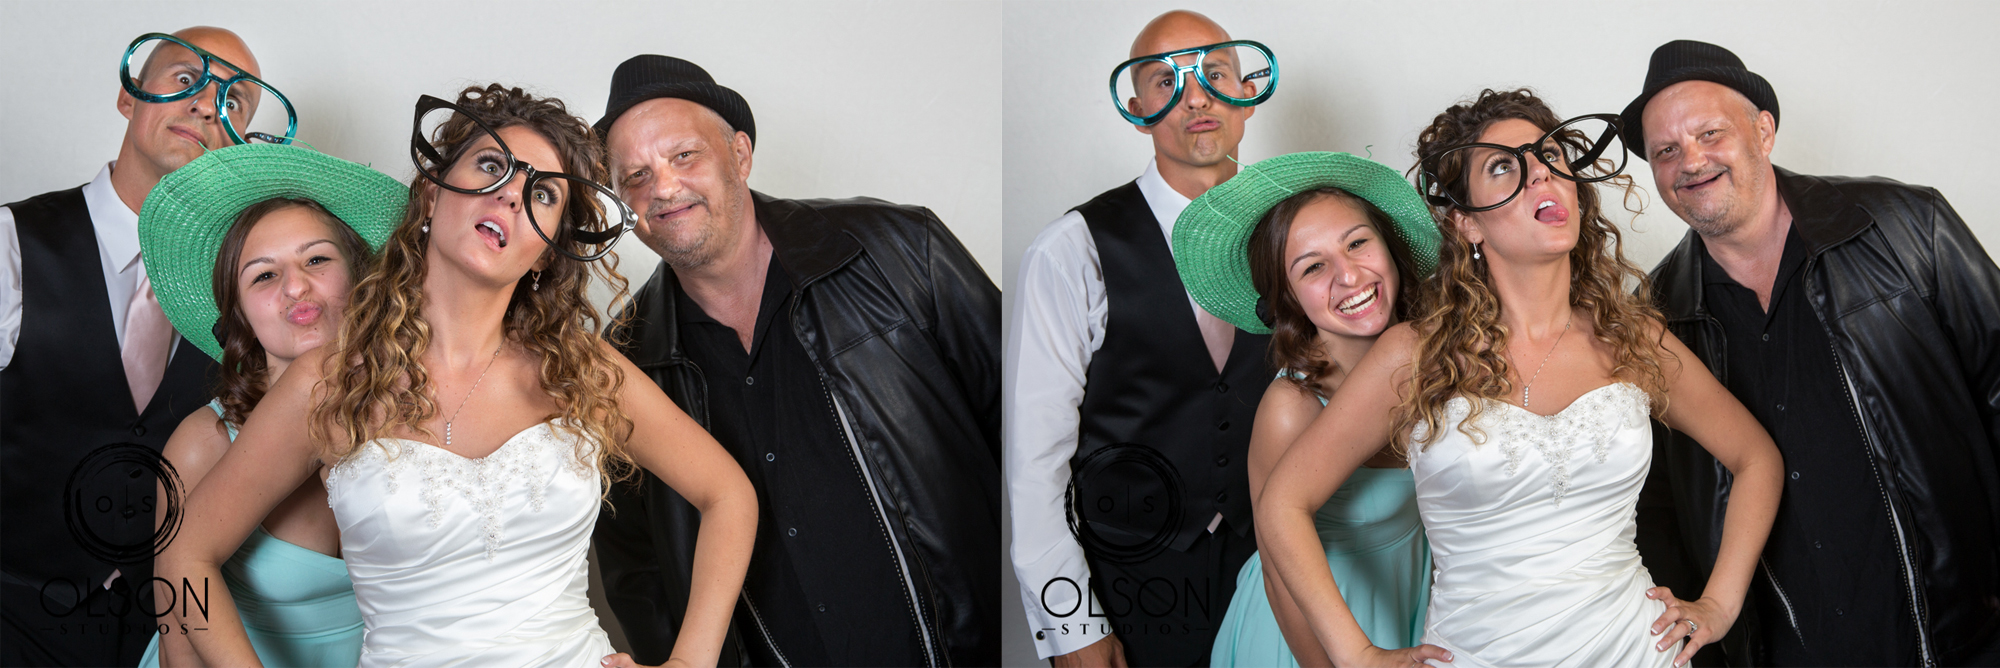 Lindsey and Darrell - Photo Booth - Red Deer Wedding Photography (40)